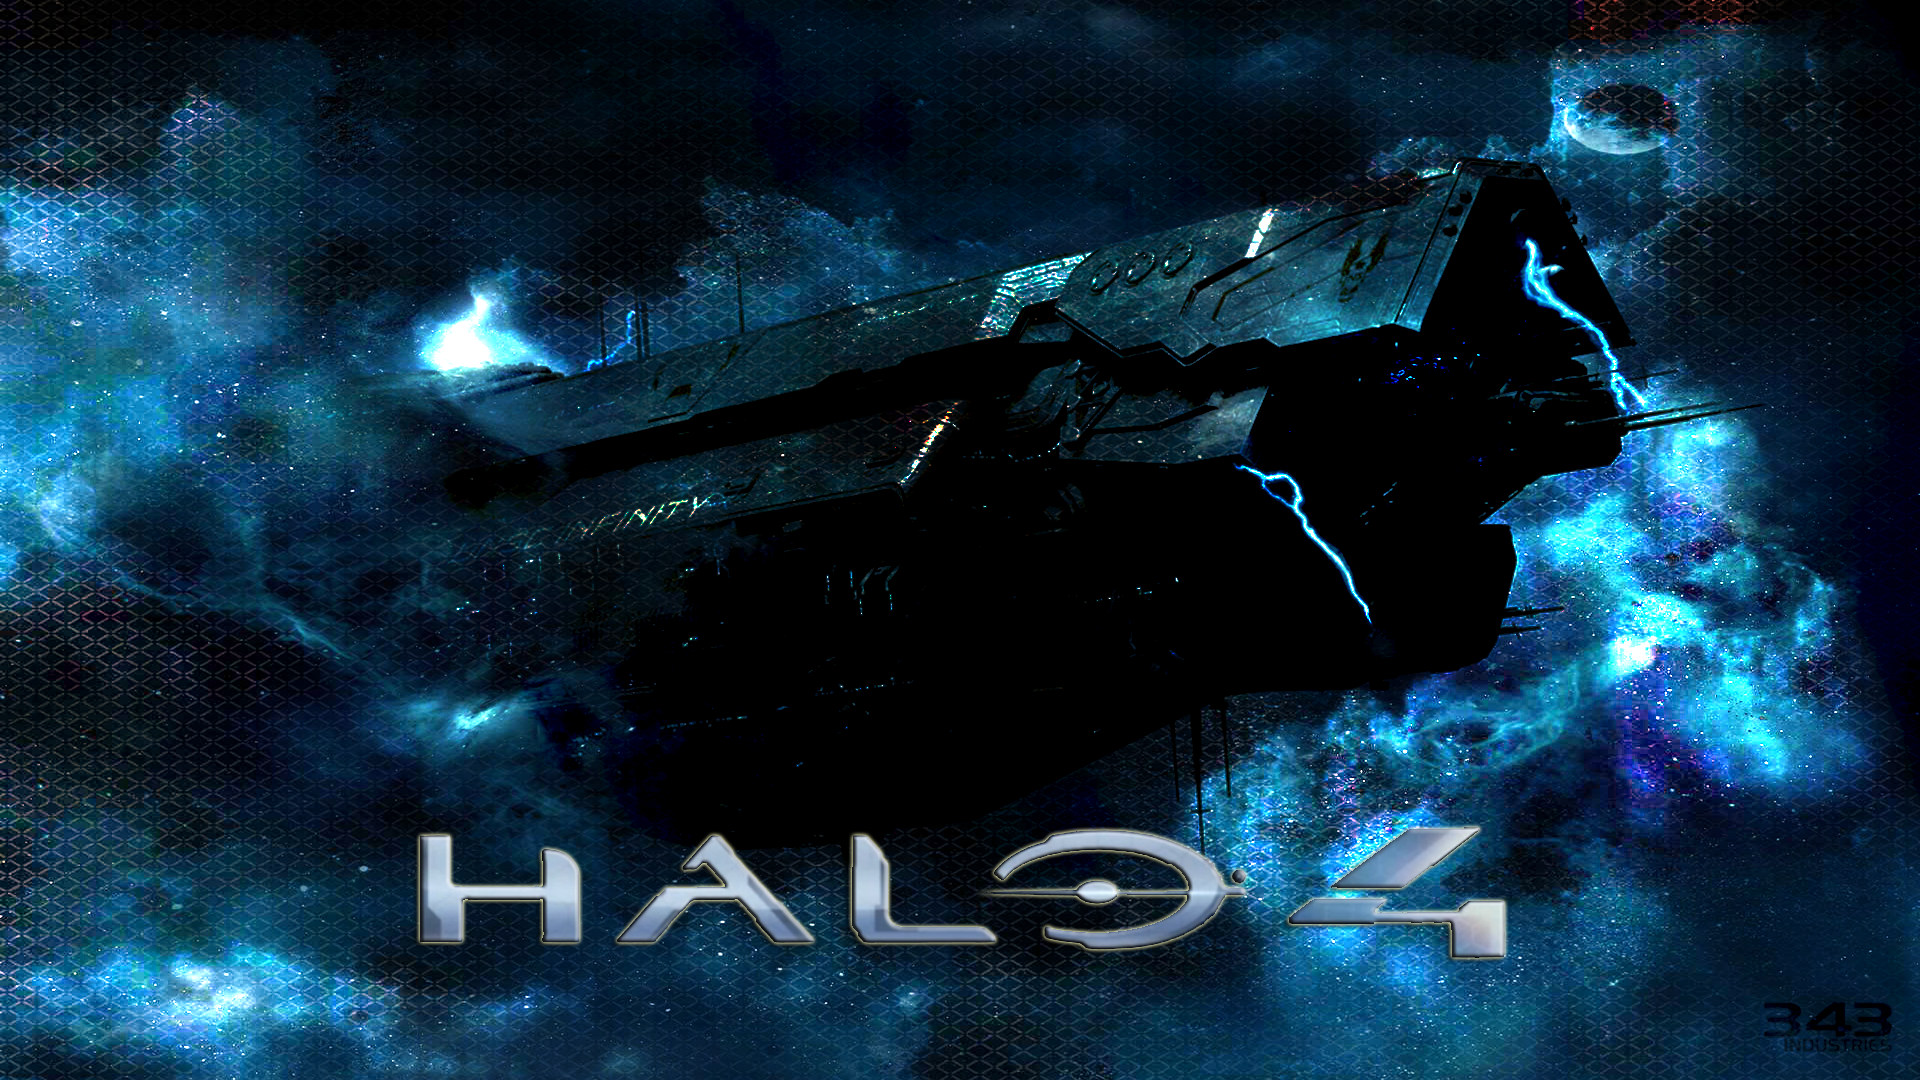 Cool Video Game Wallpaper Halowallpaper Halo Campaign